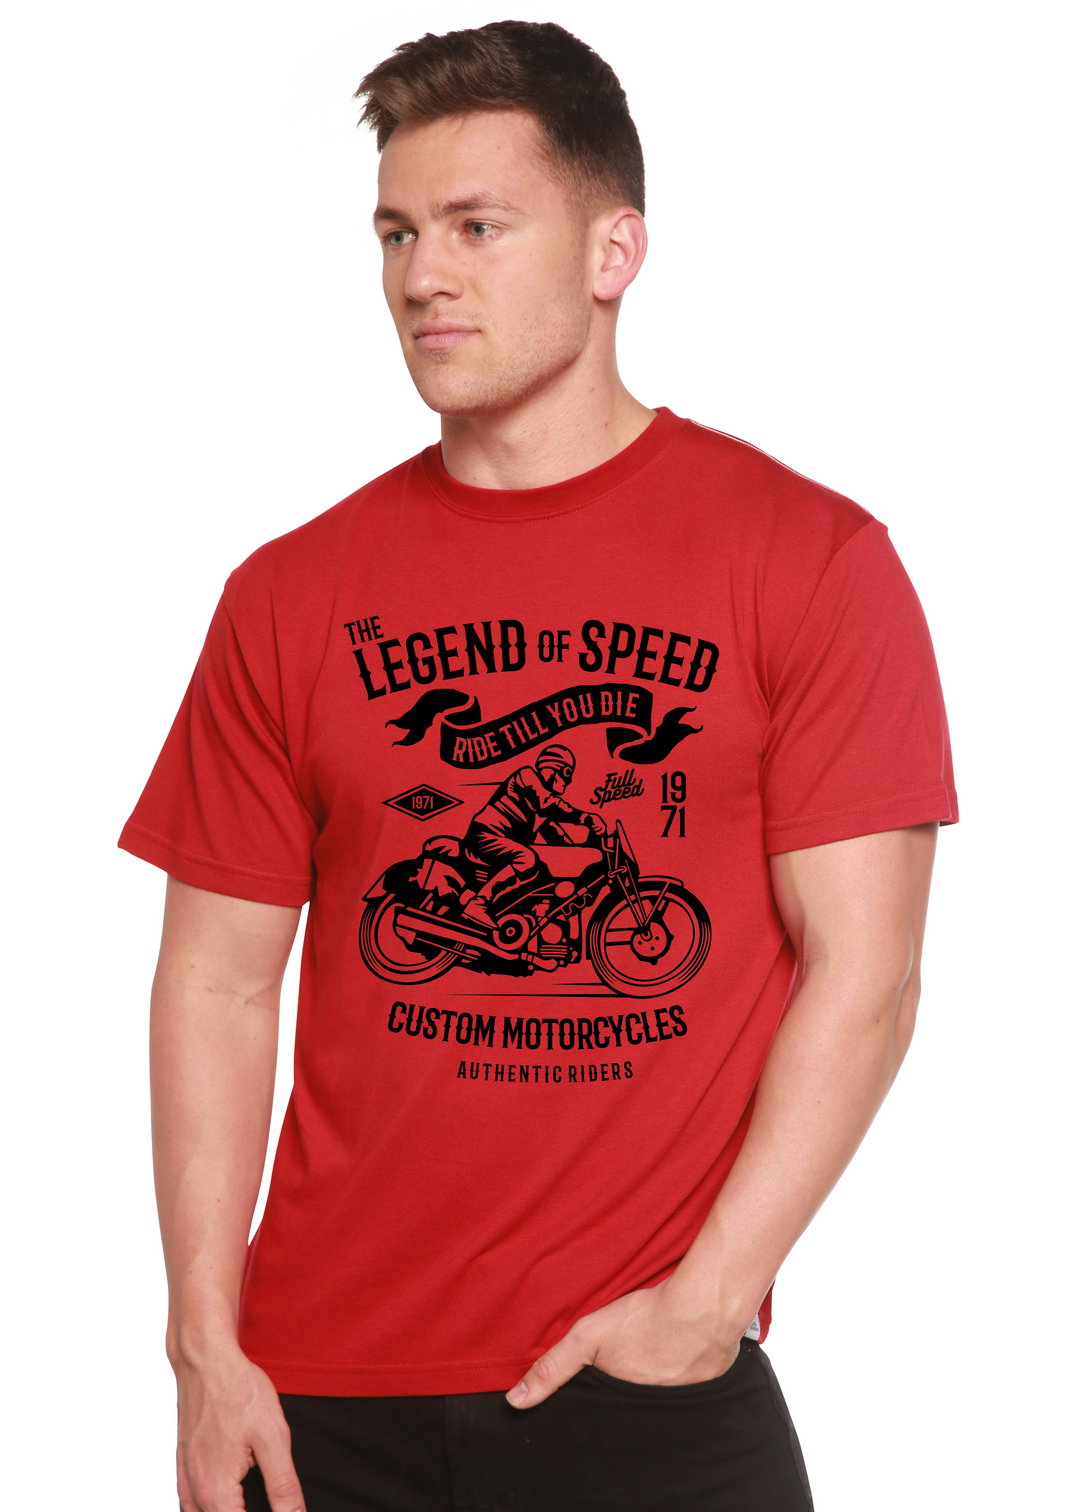 The Legend of Speed men's bamboo tshirt pompeian red